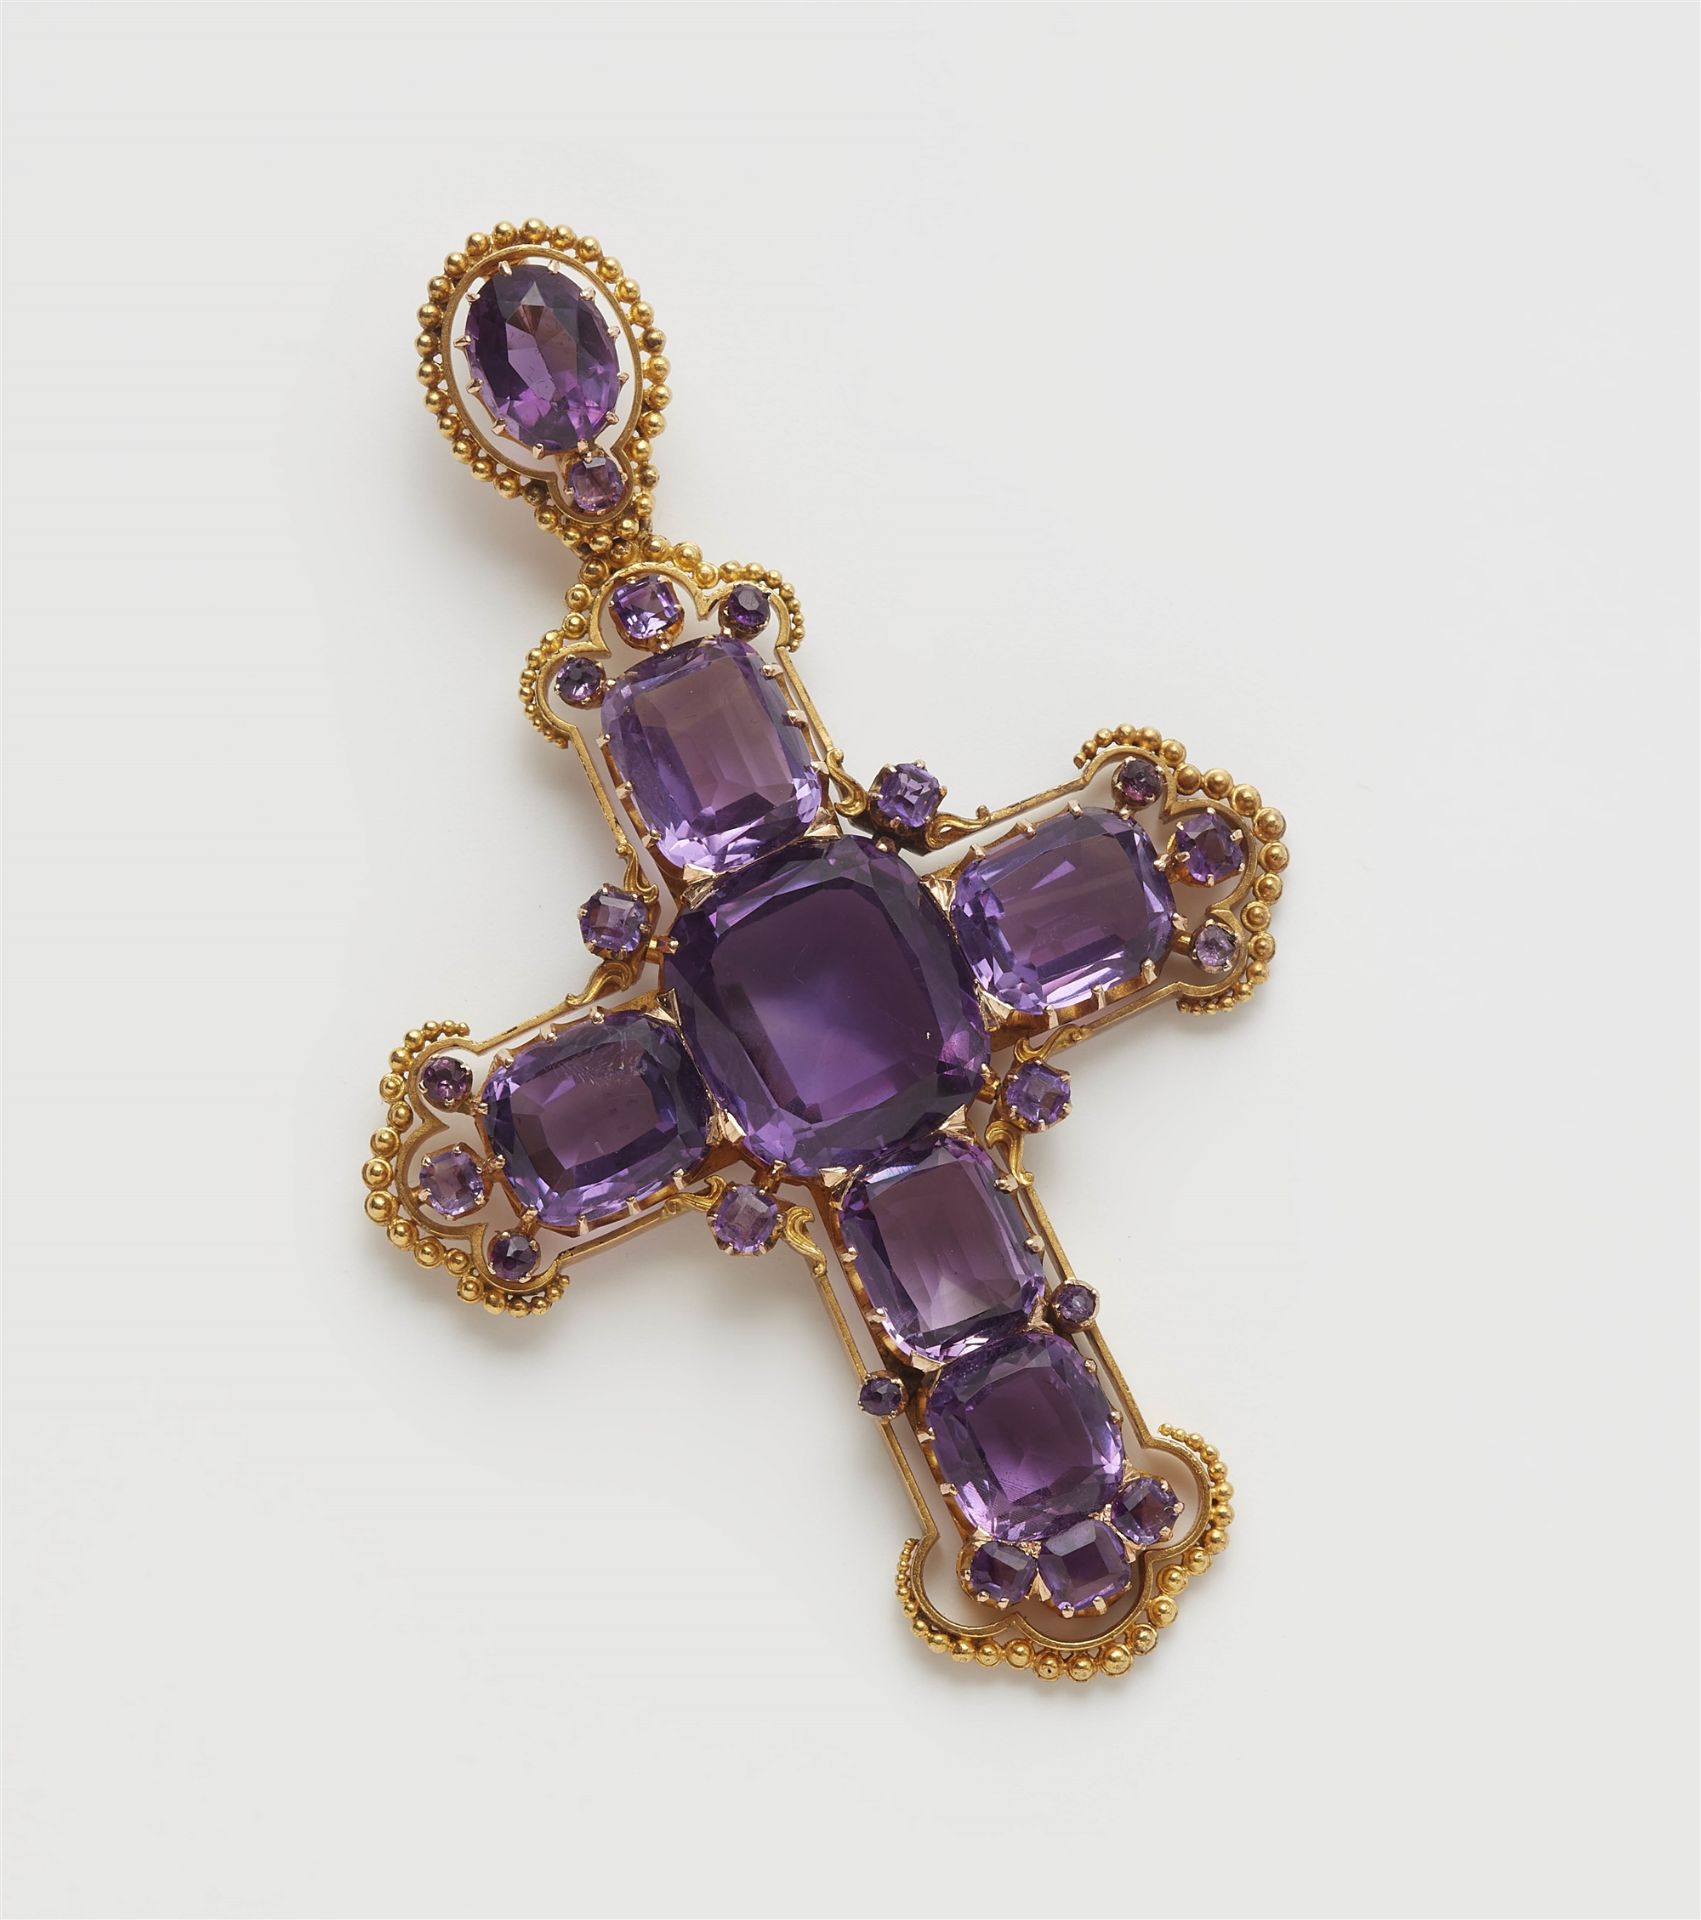 A historicist 14k gold and amethyst pectoral cross pendant.